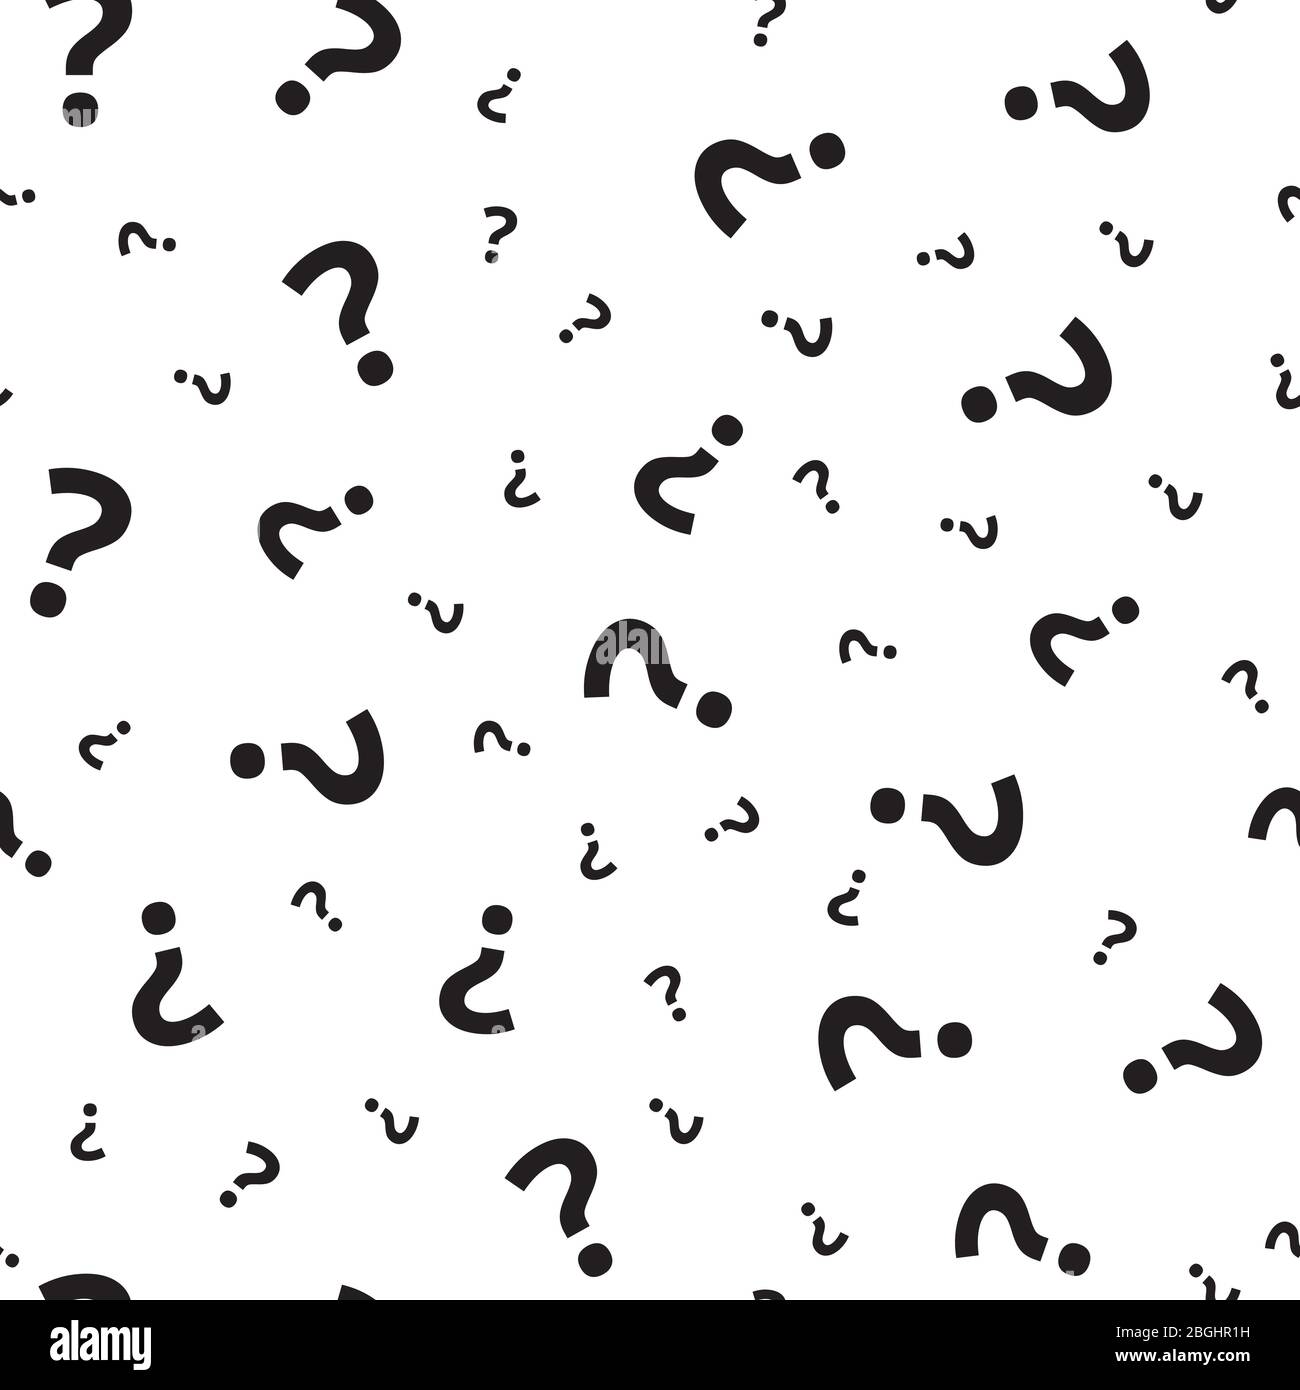 Question mark grunge seamless pattern. Query marks random vector repeat background. Interrogation and chaotic question illustration Stock Vector